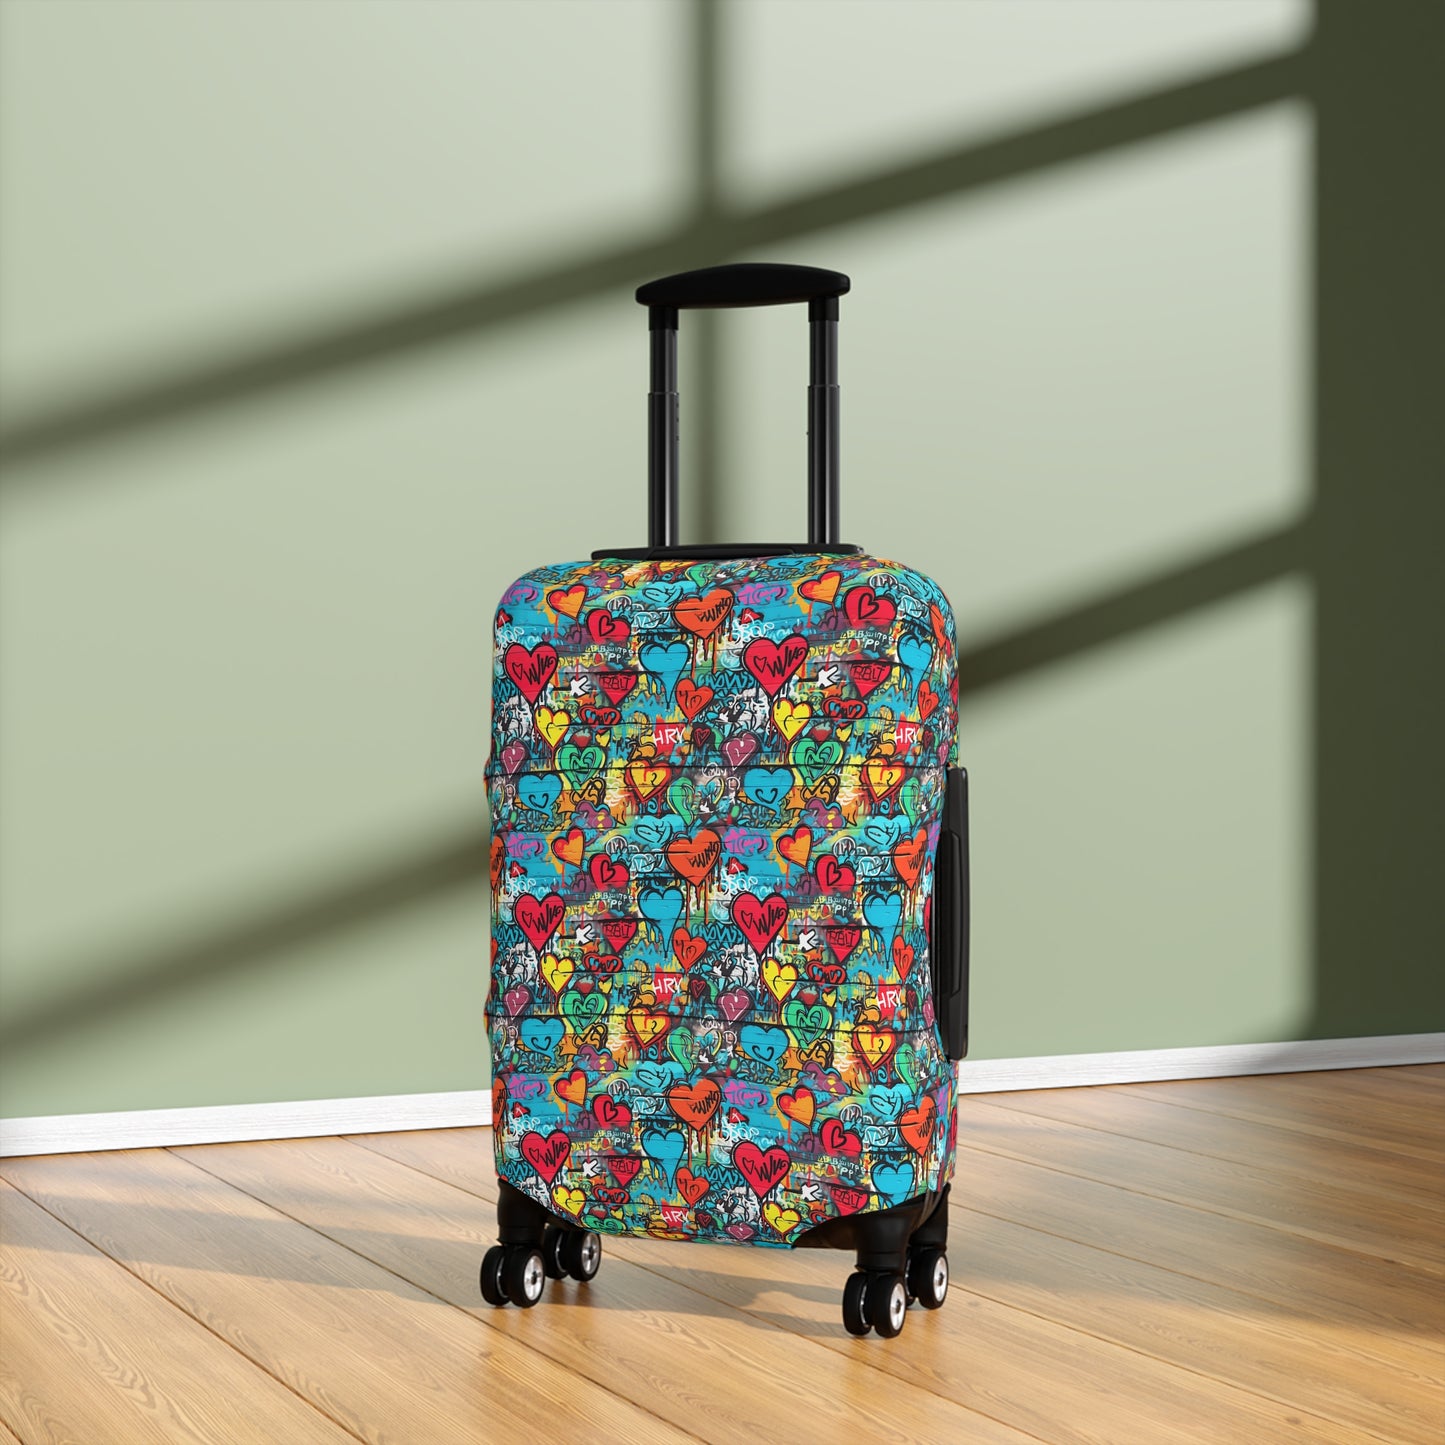 Street Art Graffiti Hearts Design  - Luggage Protector and Cover 3 Sizes